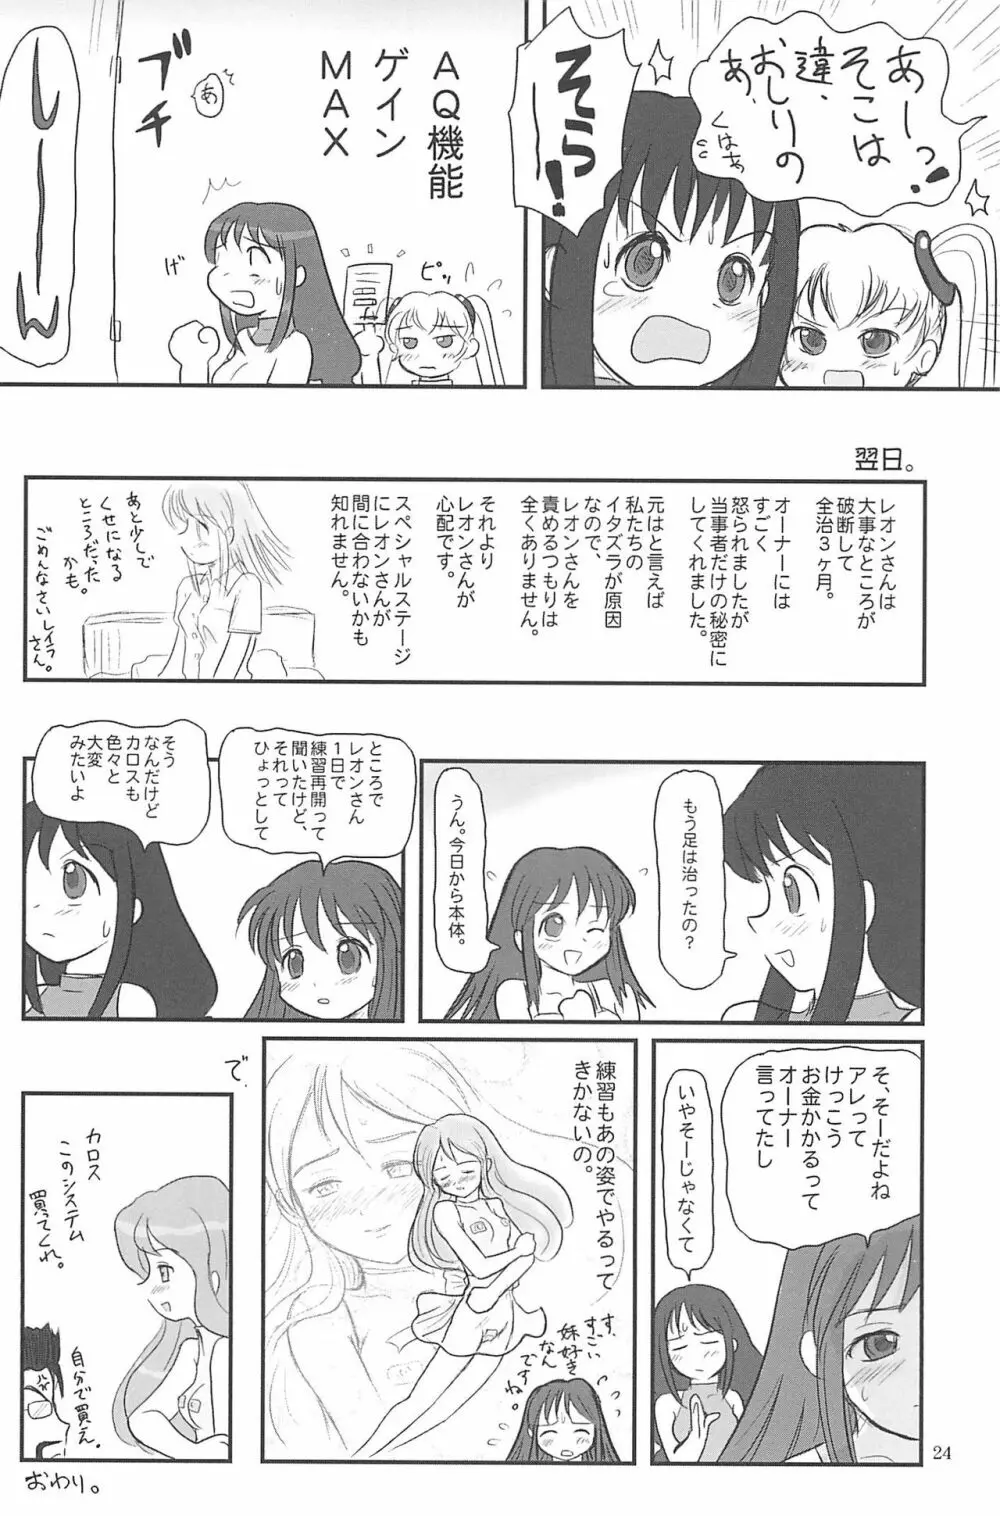 ND-special Volume 5 24ページ